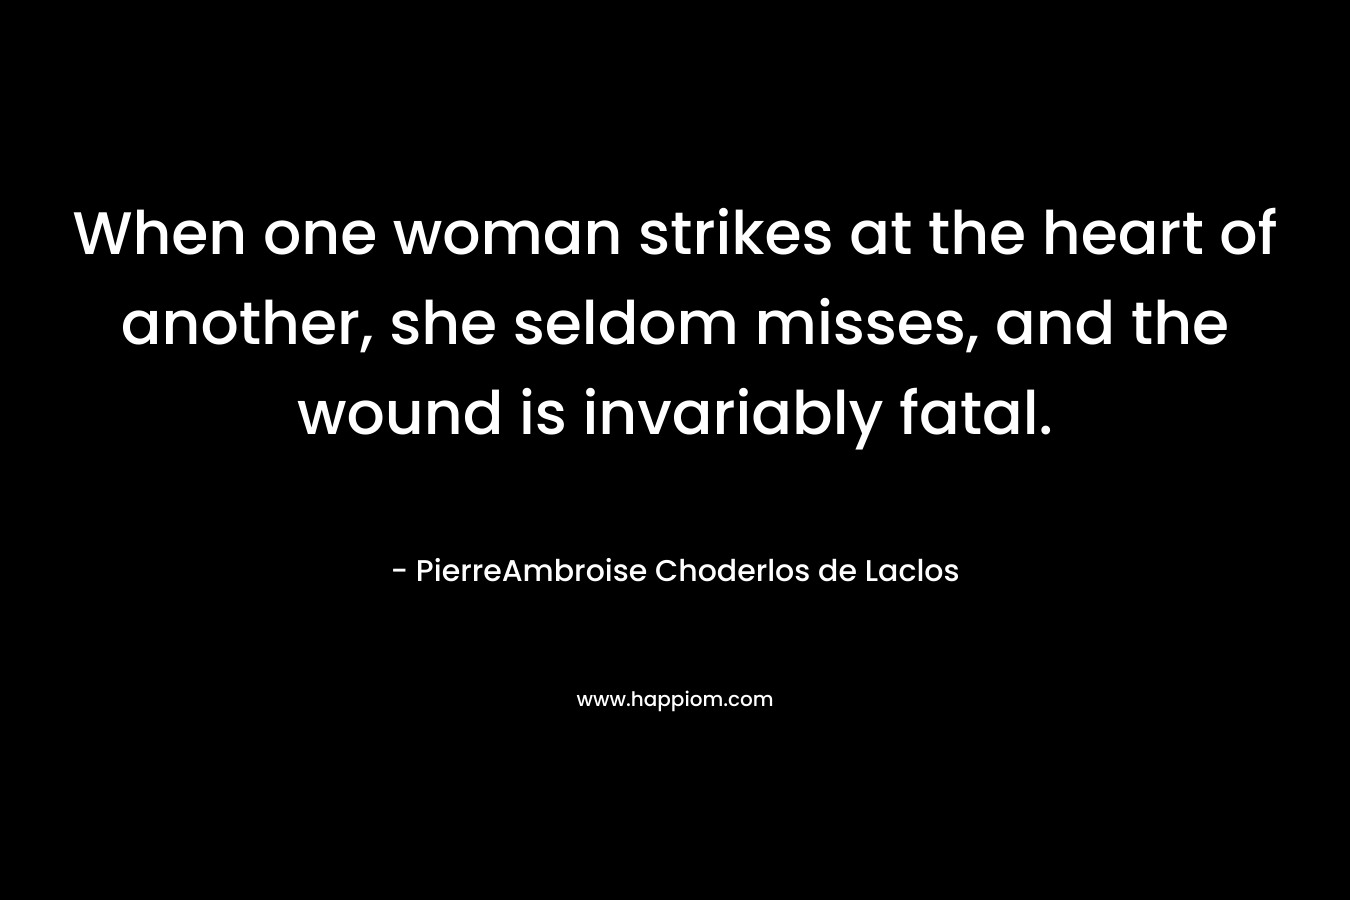 When one woman strikes at the heart of another, she seldom misses, and the wound is invariably fatal. – PierreAmbroise Choderlos de Laclos